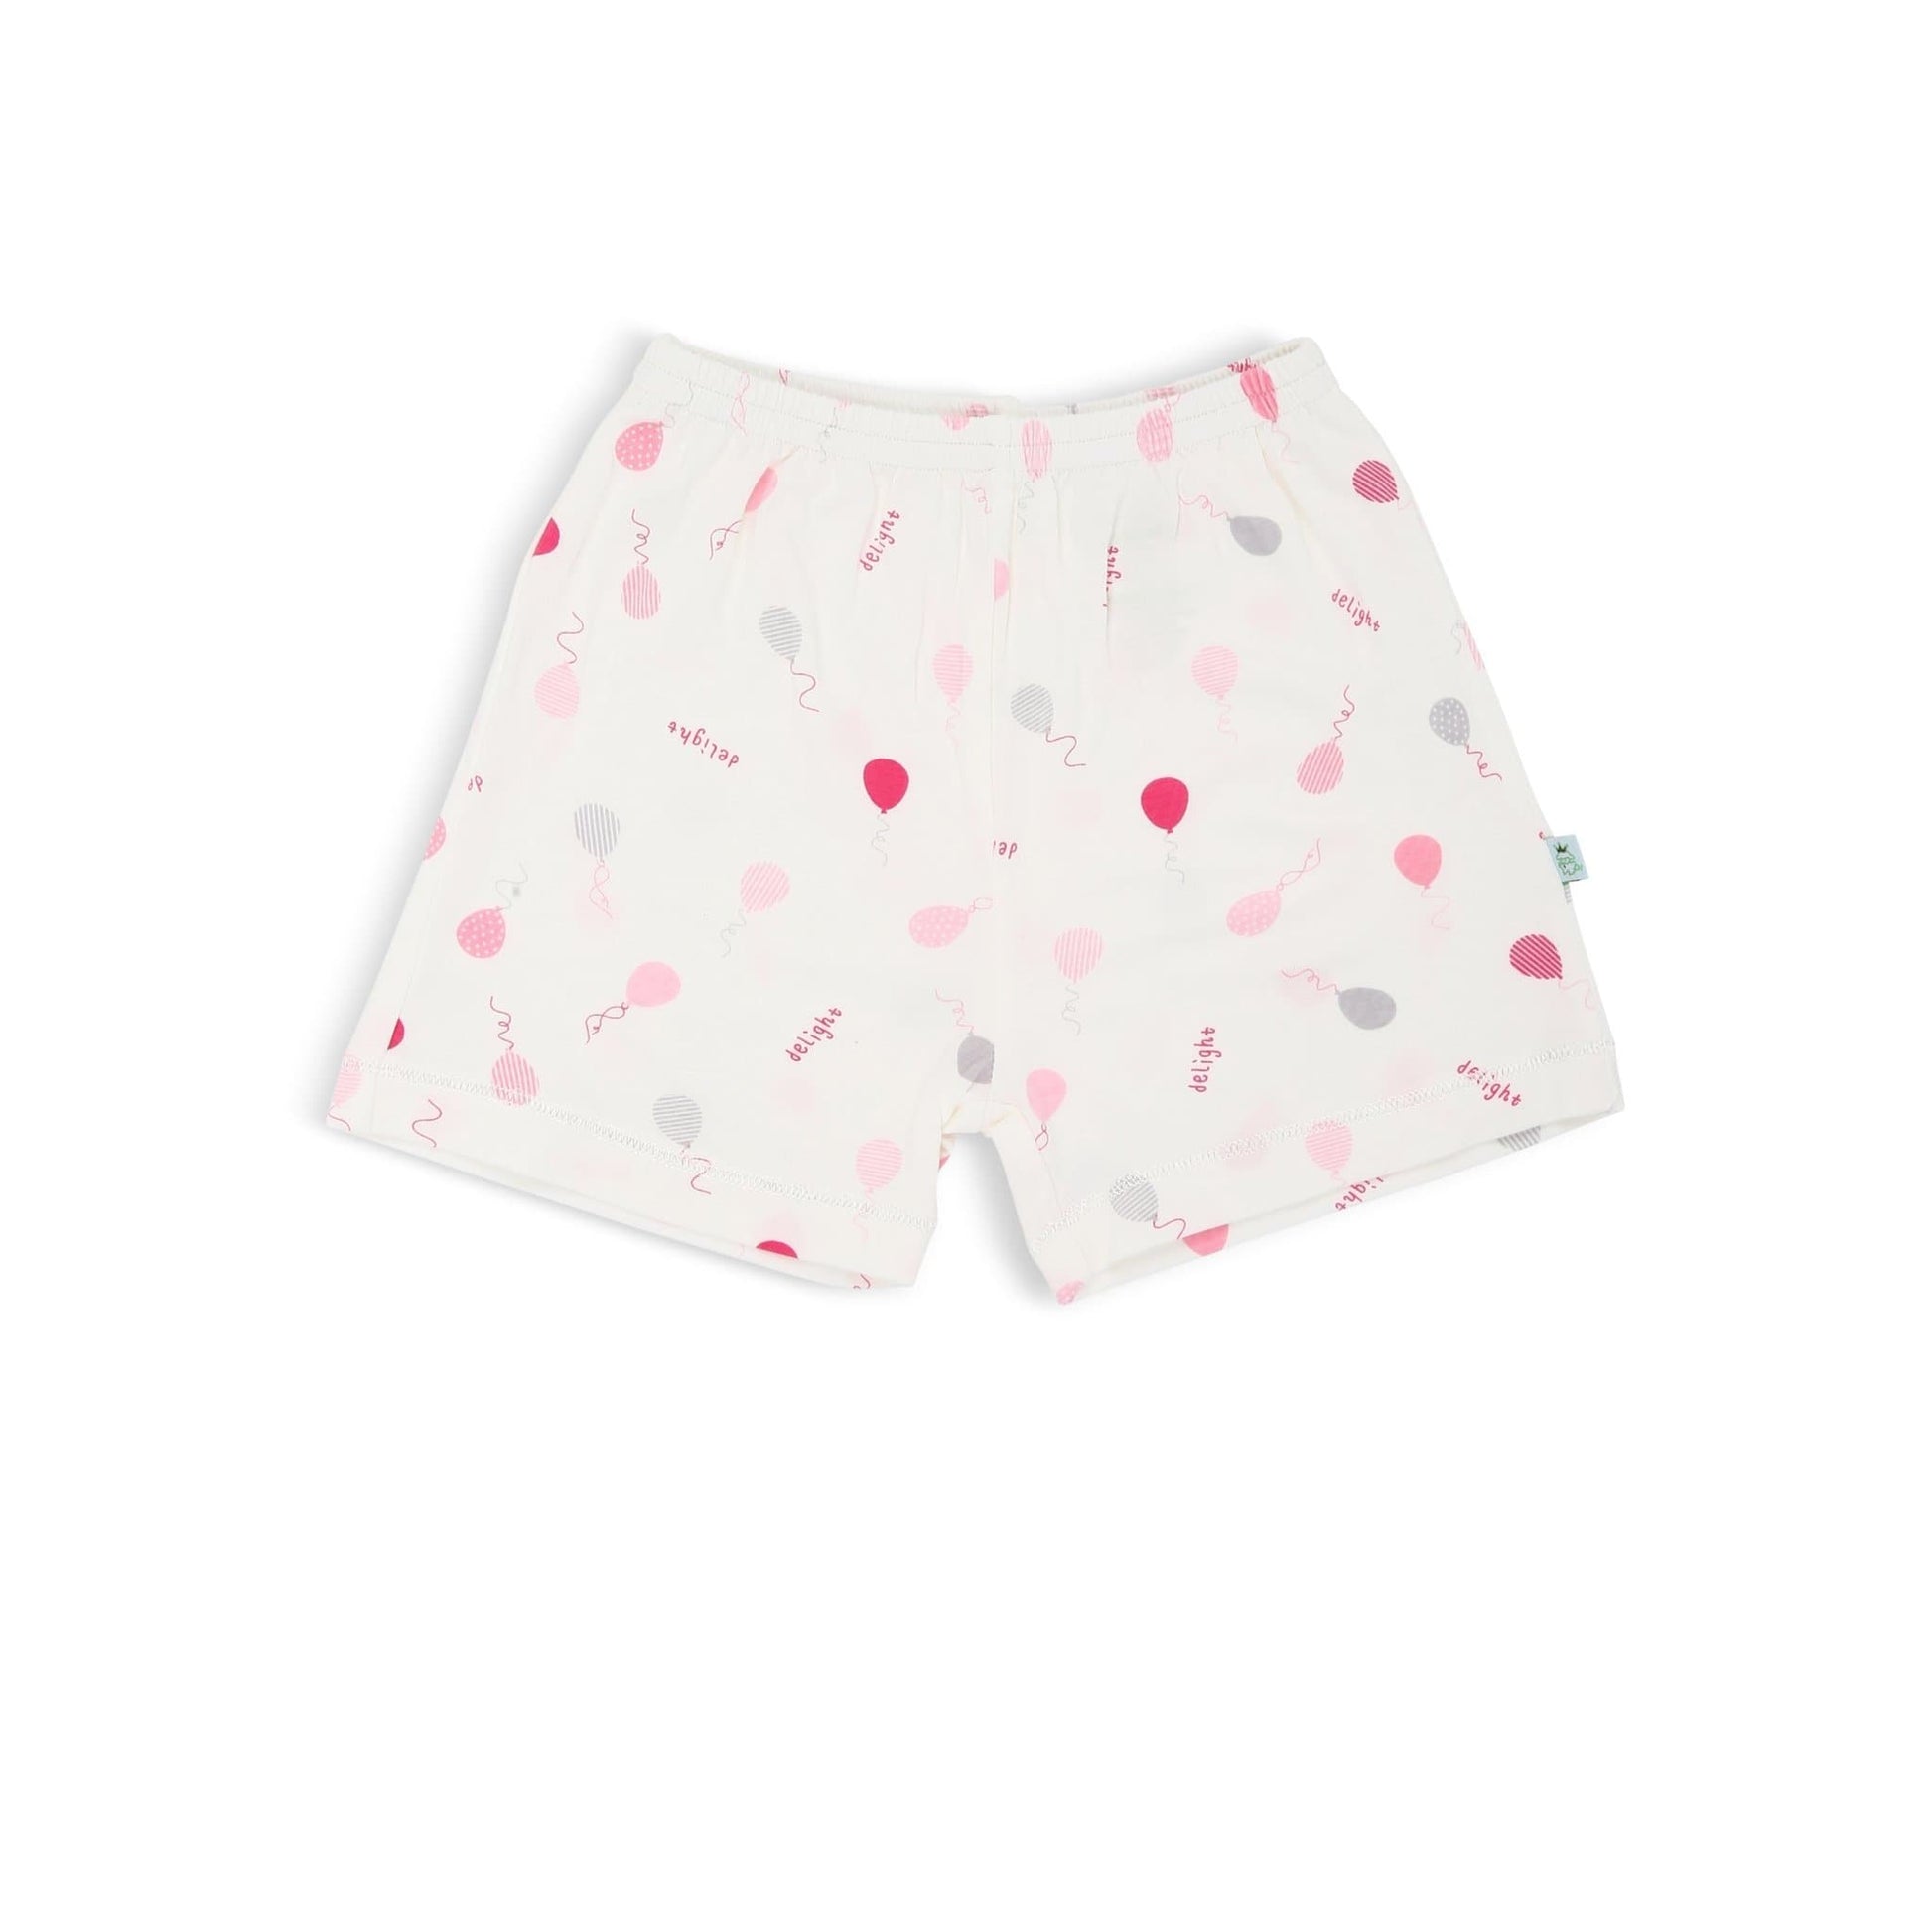 Pink Delight Balloons - Shorts by simplylifebaby